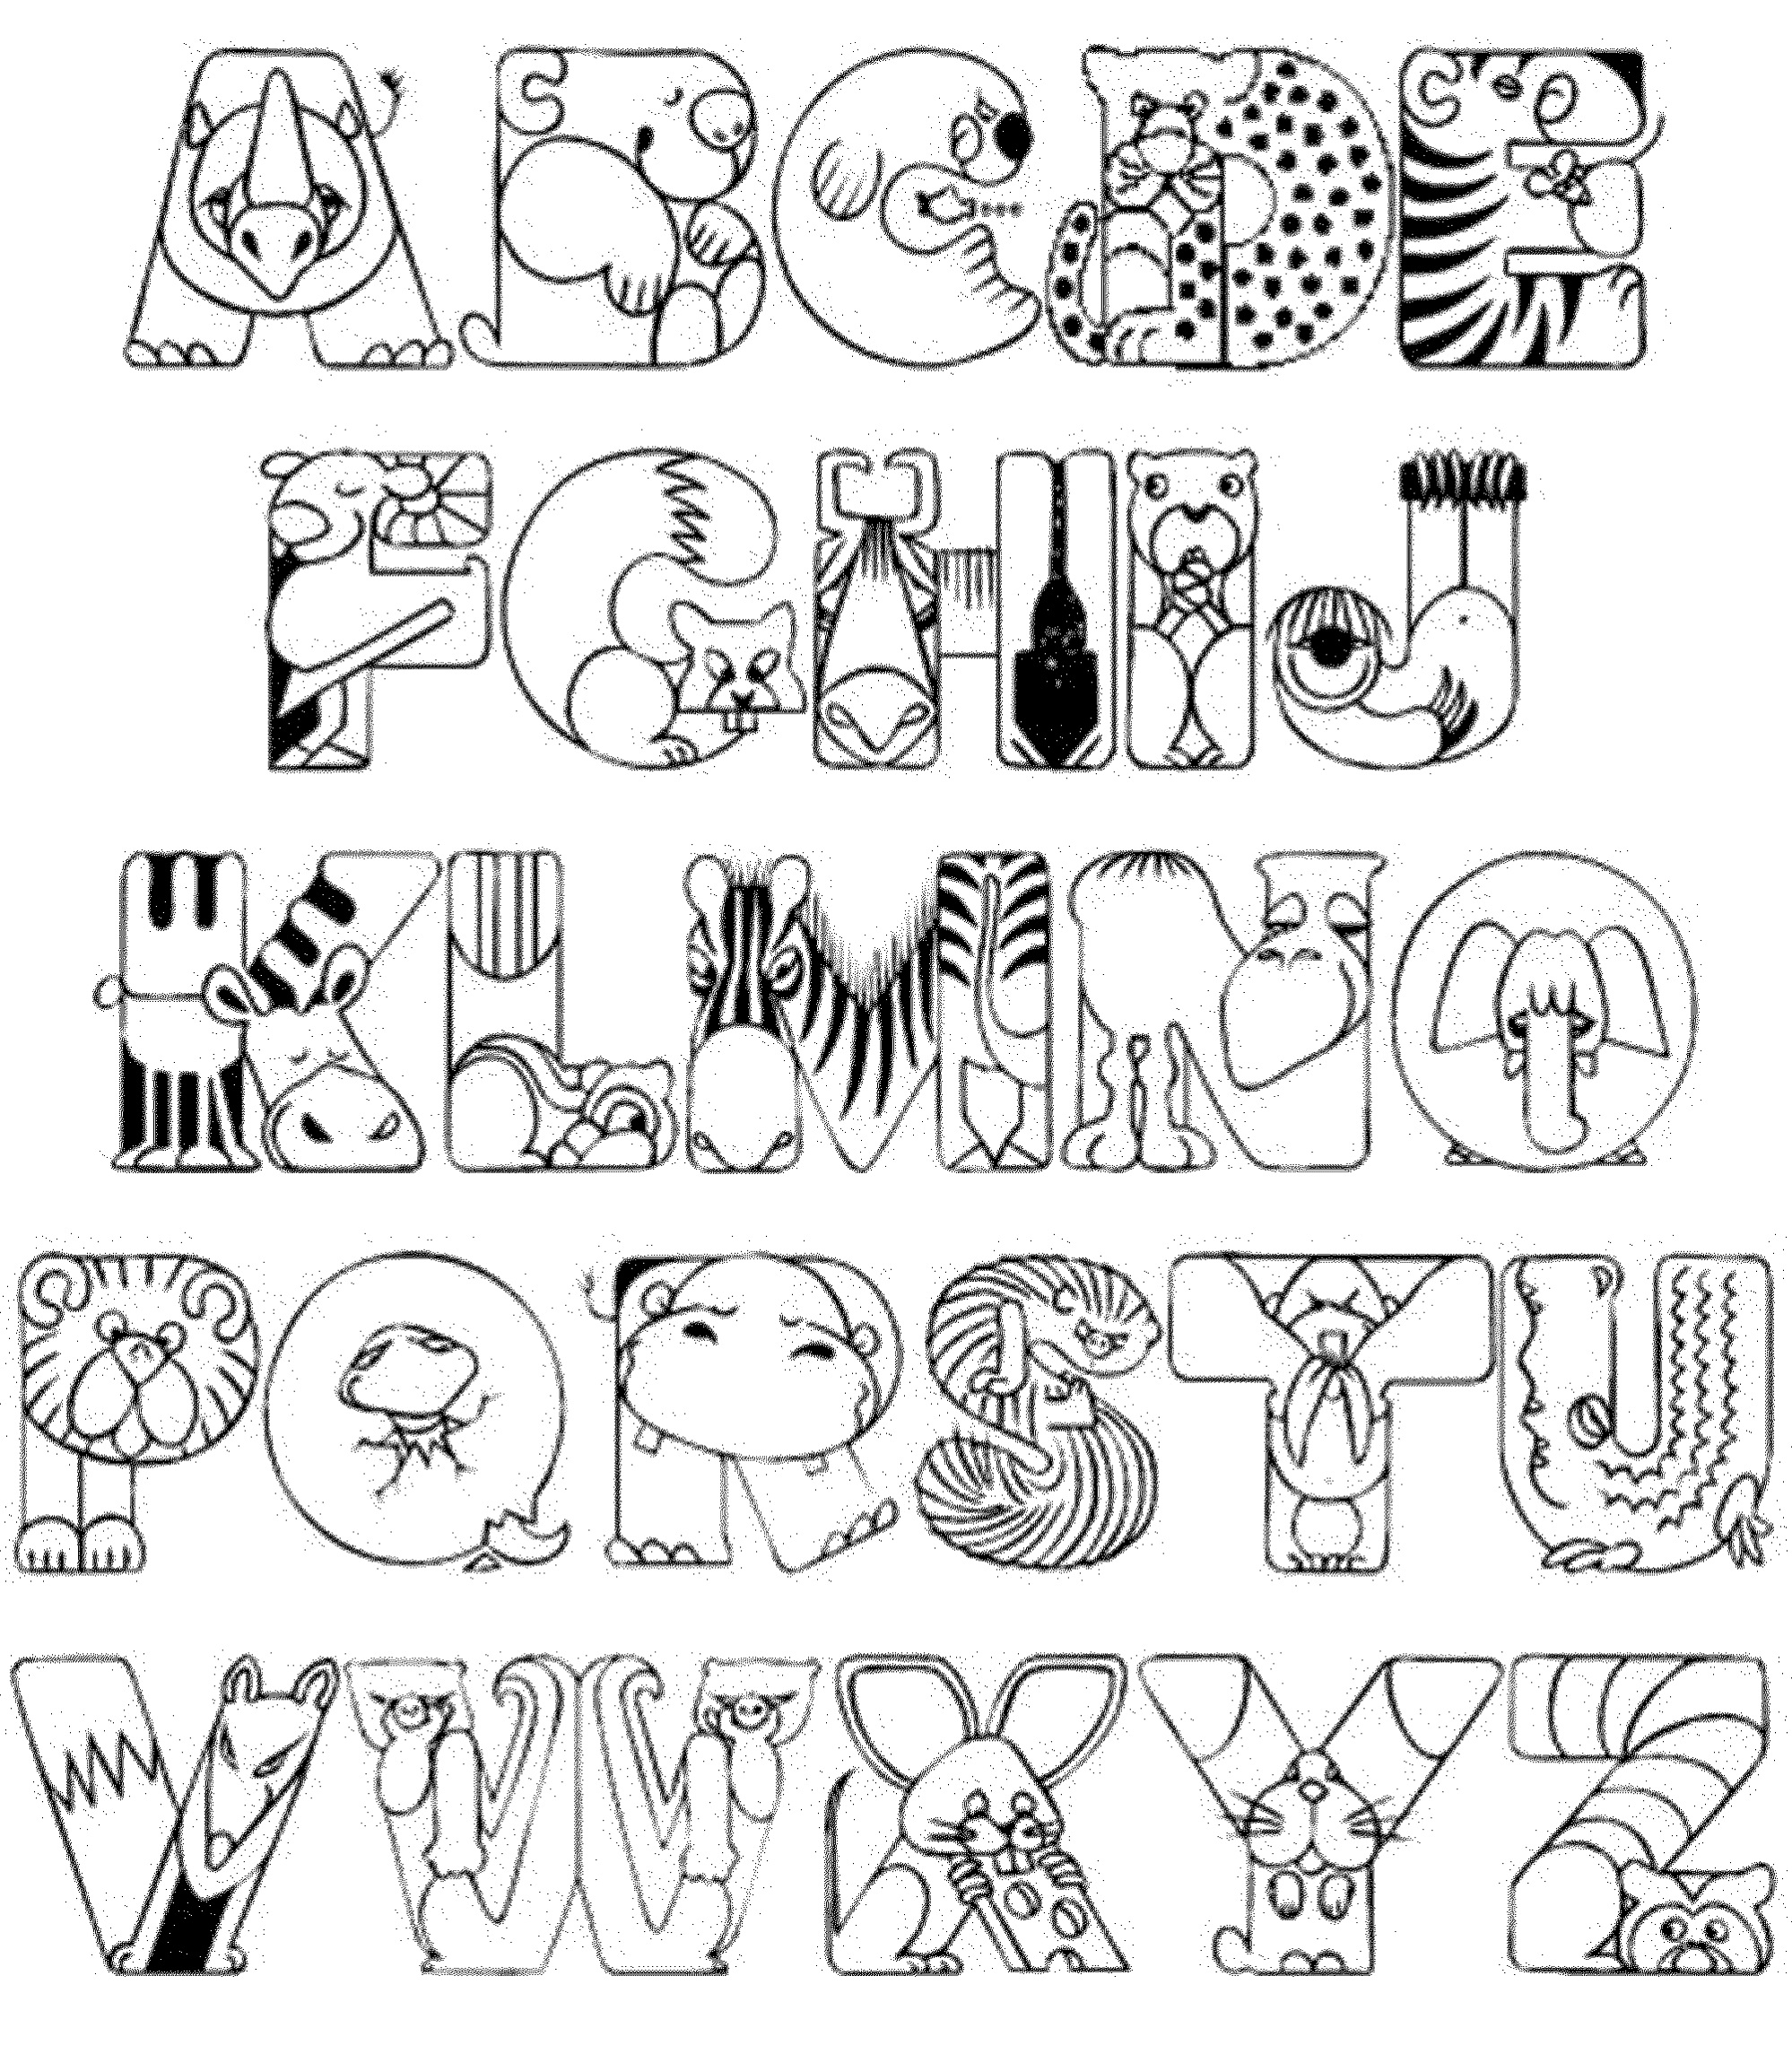 alphabet-coloring-sheets-a-to-z-activity-shelter